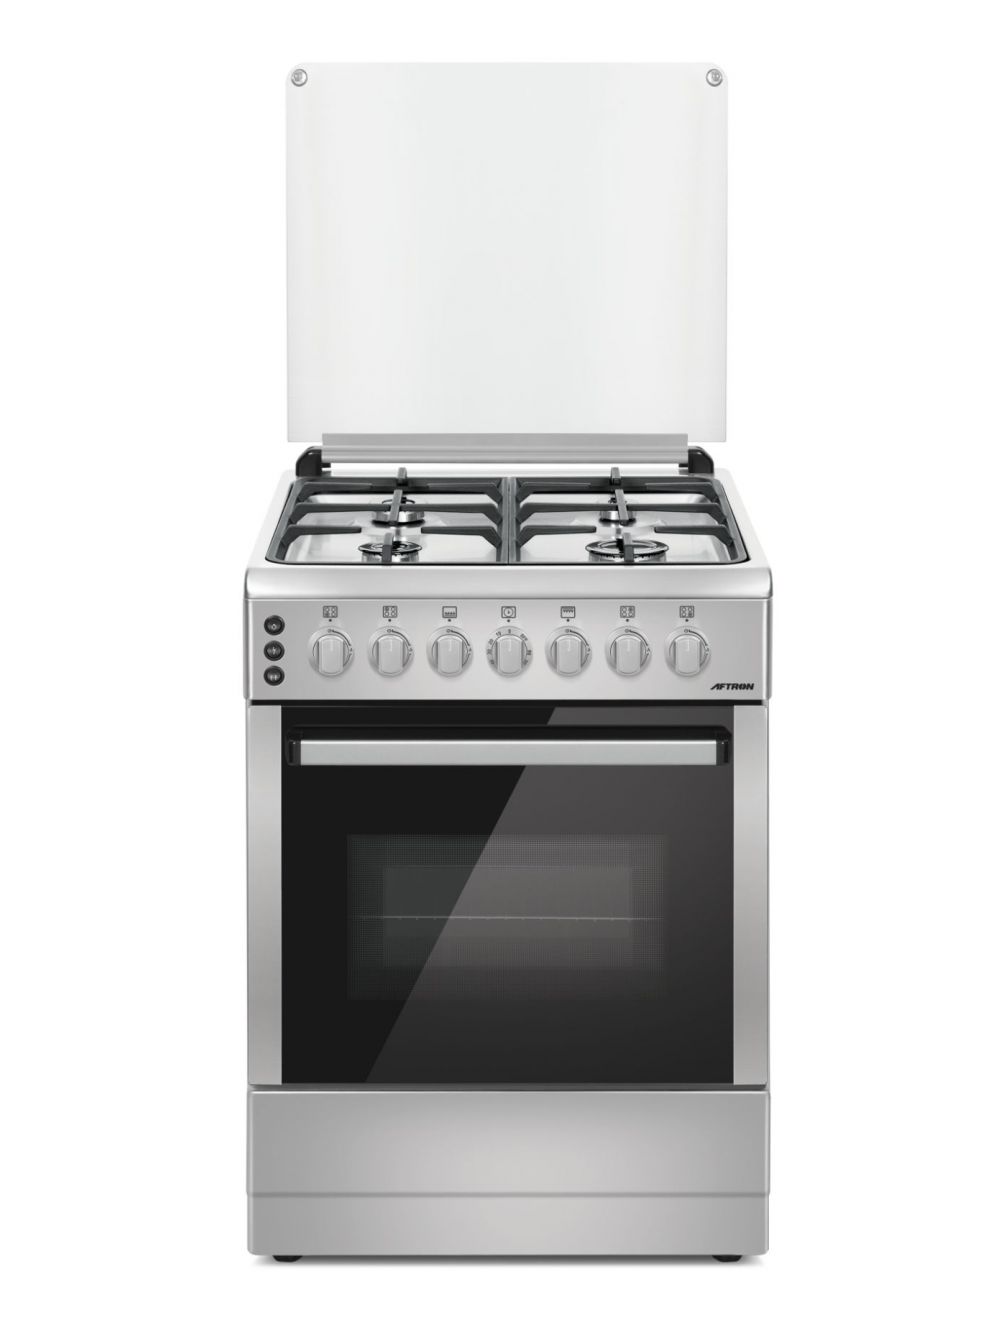 Aftron 60 x 60 Cooking Range with Cast Iron-AFGR6570CFSD